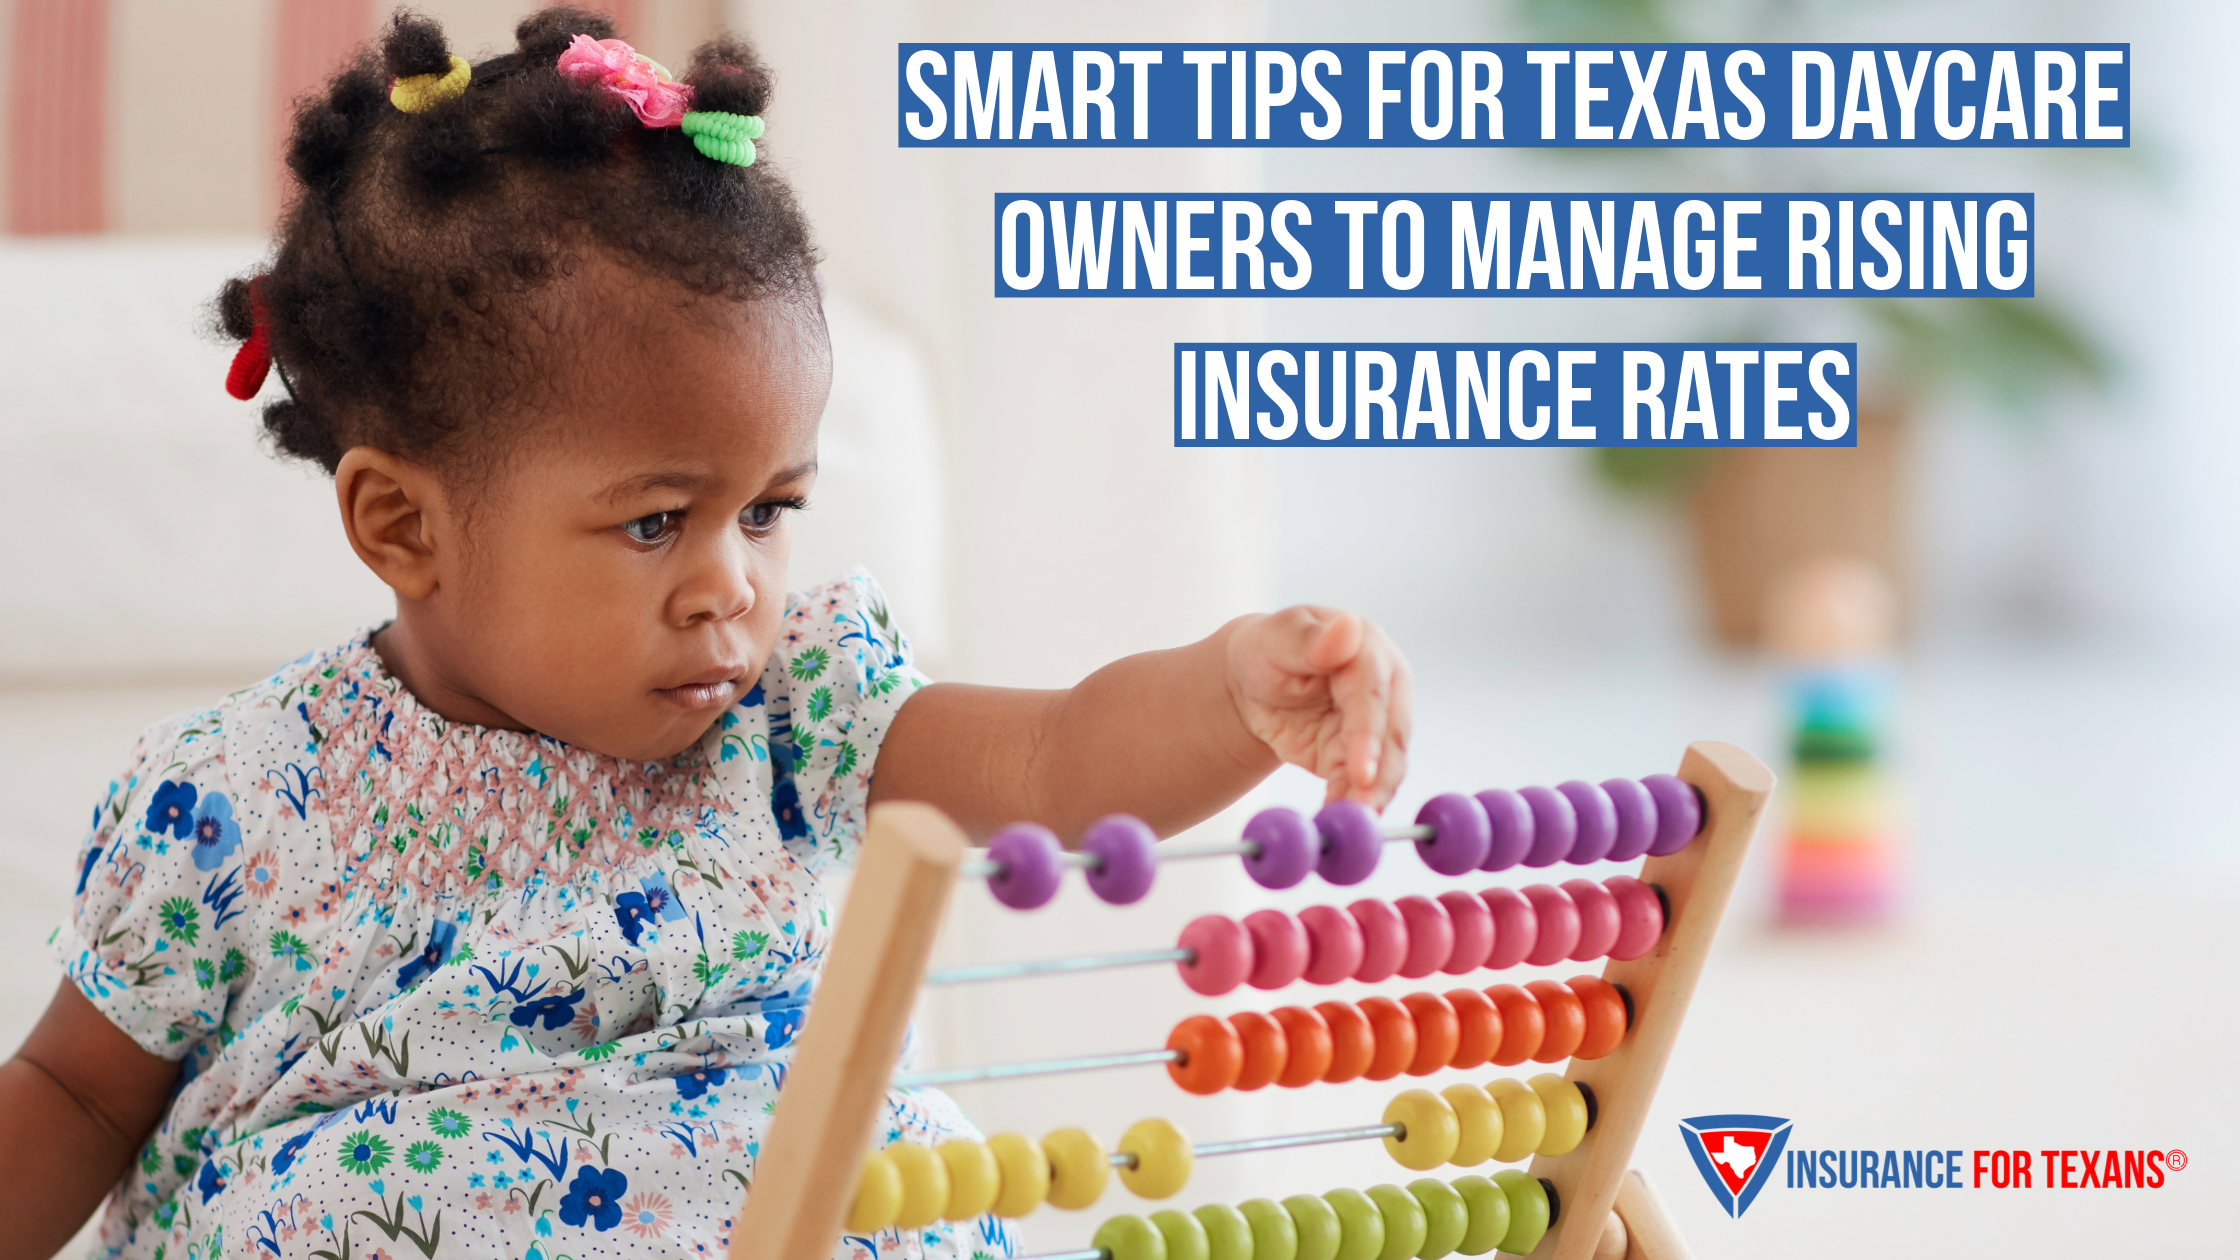 Smart Tips for Texas Daycare Owners to Manage Rising Insurance Rates